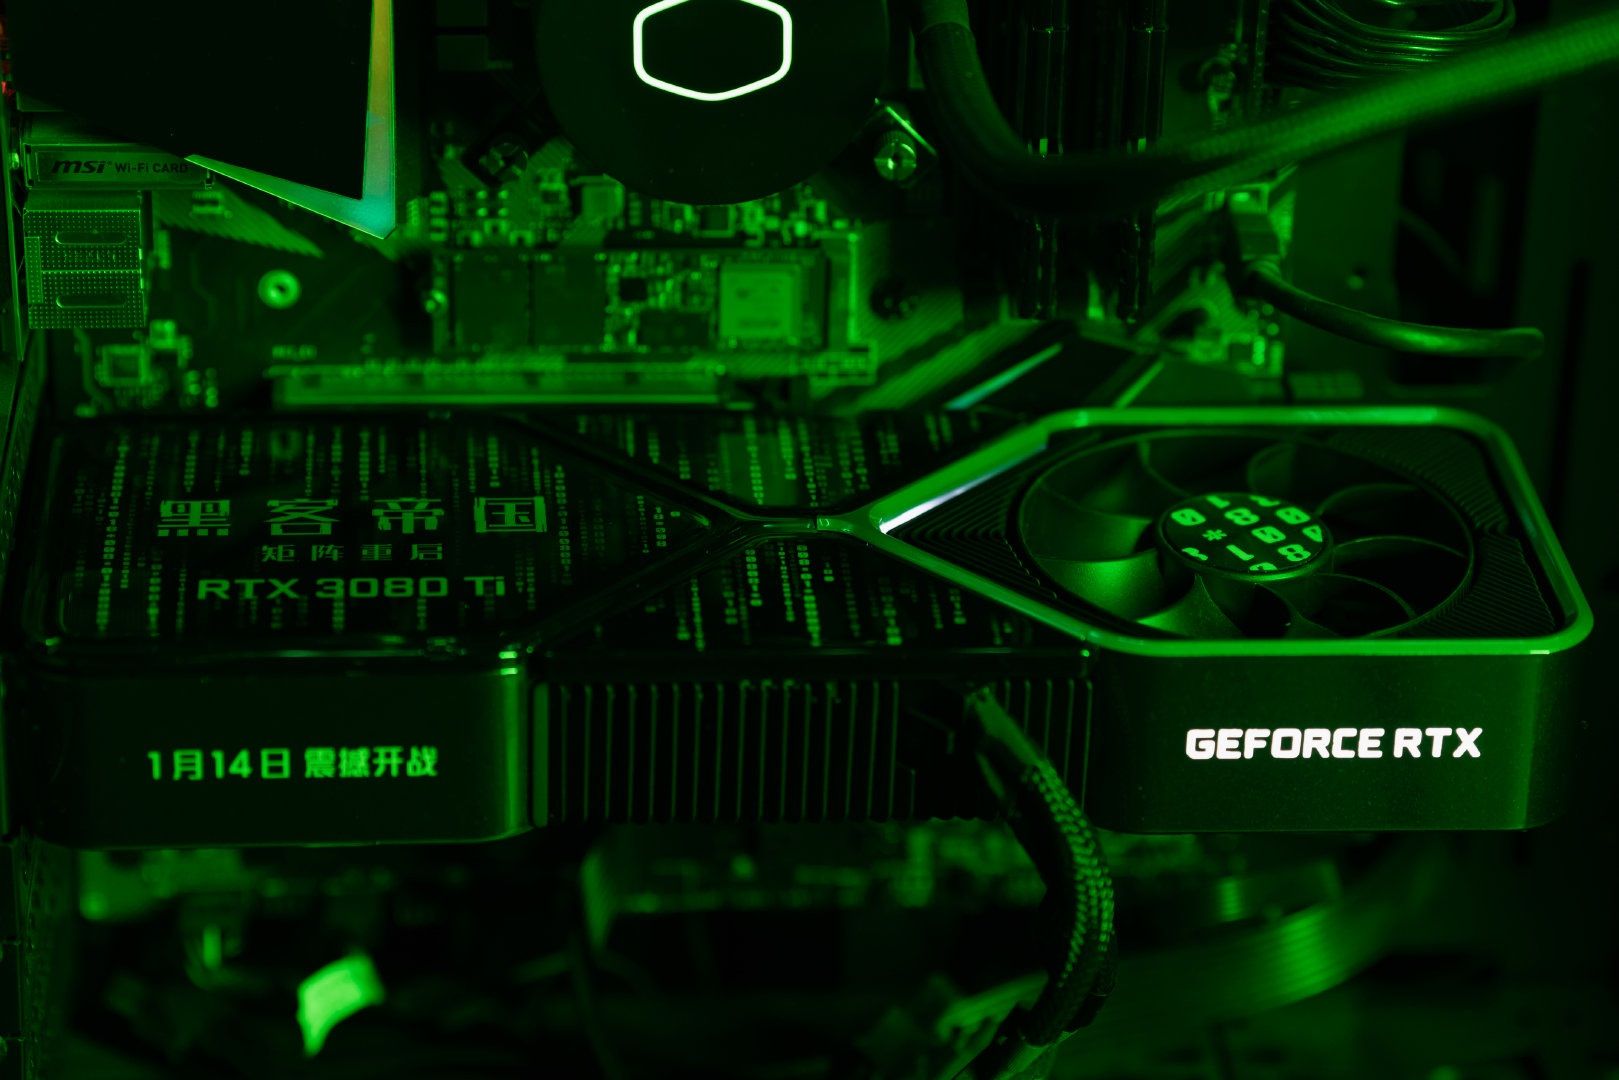 Nvidia RTX 3080 Ti Founders Edition graphics card with Matrix style look with a green filter over the image.